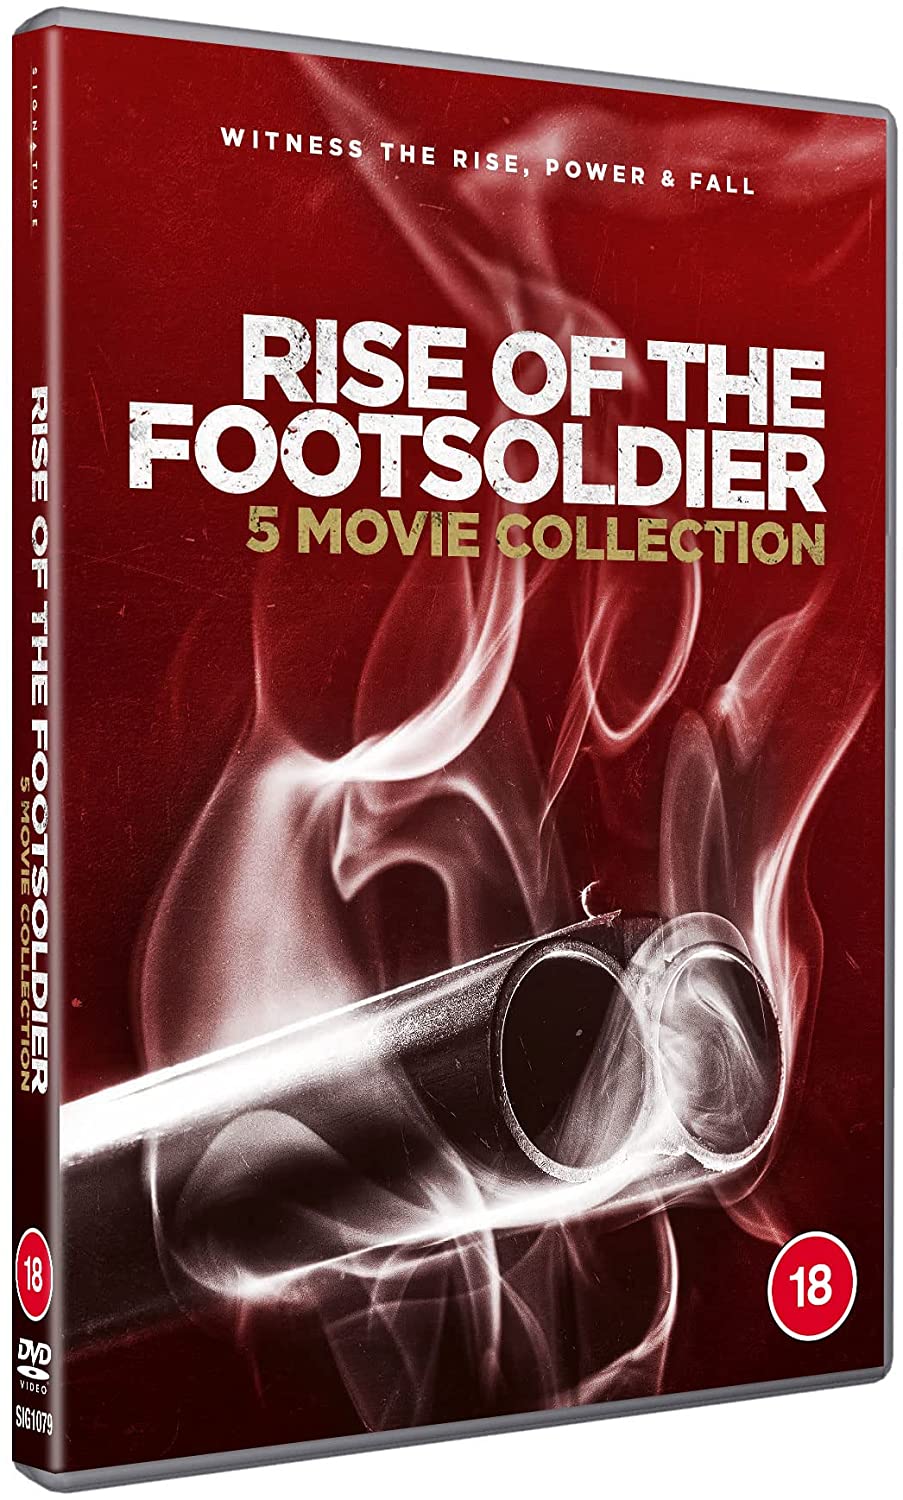 Rise of the Footsoldier Boxset 1-5 [2021] - Crime/Drama [DVD]